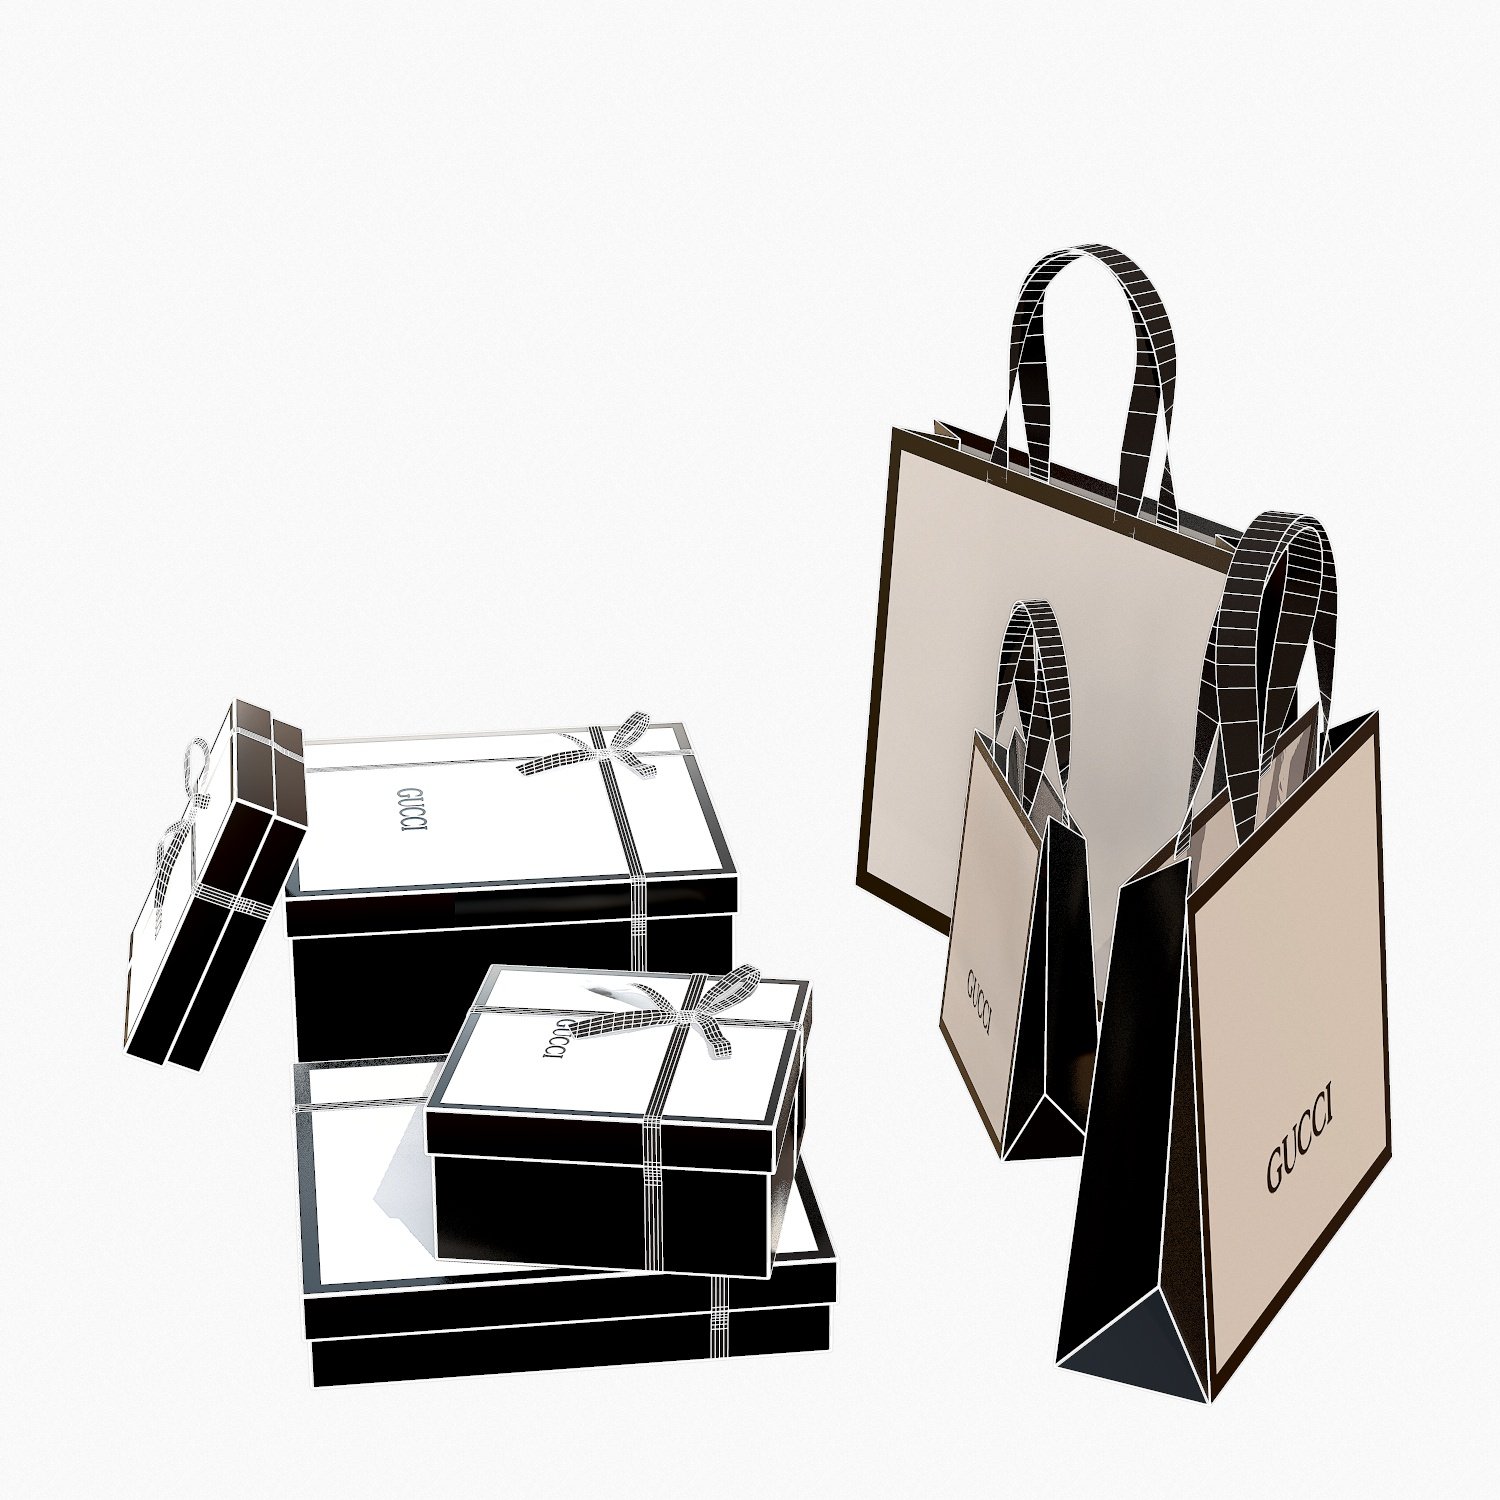 Fendi Luxury Packaging Boxes and Paper Bags | 3D model